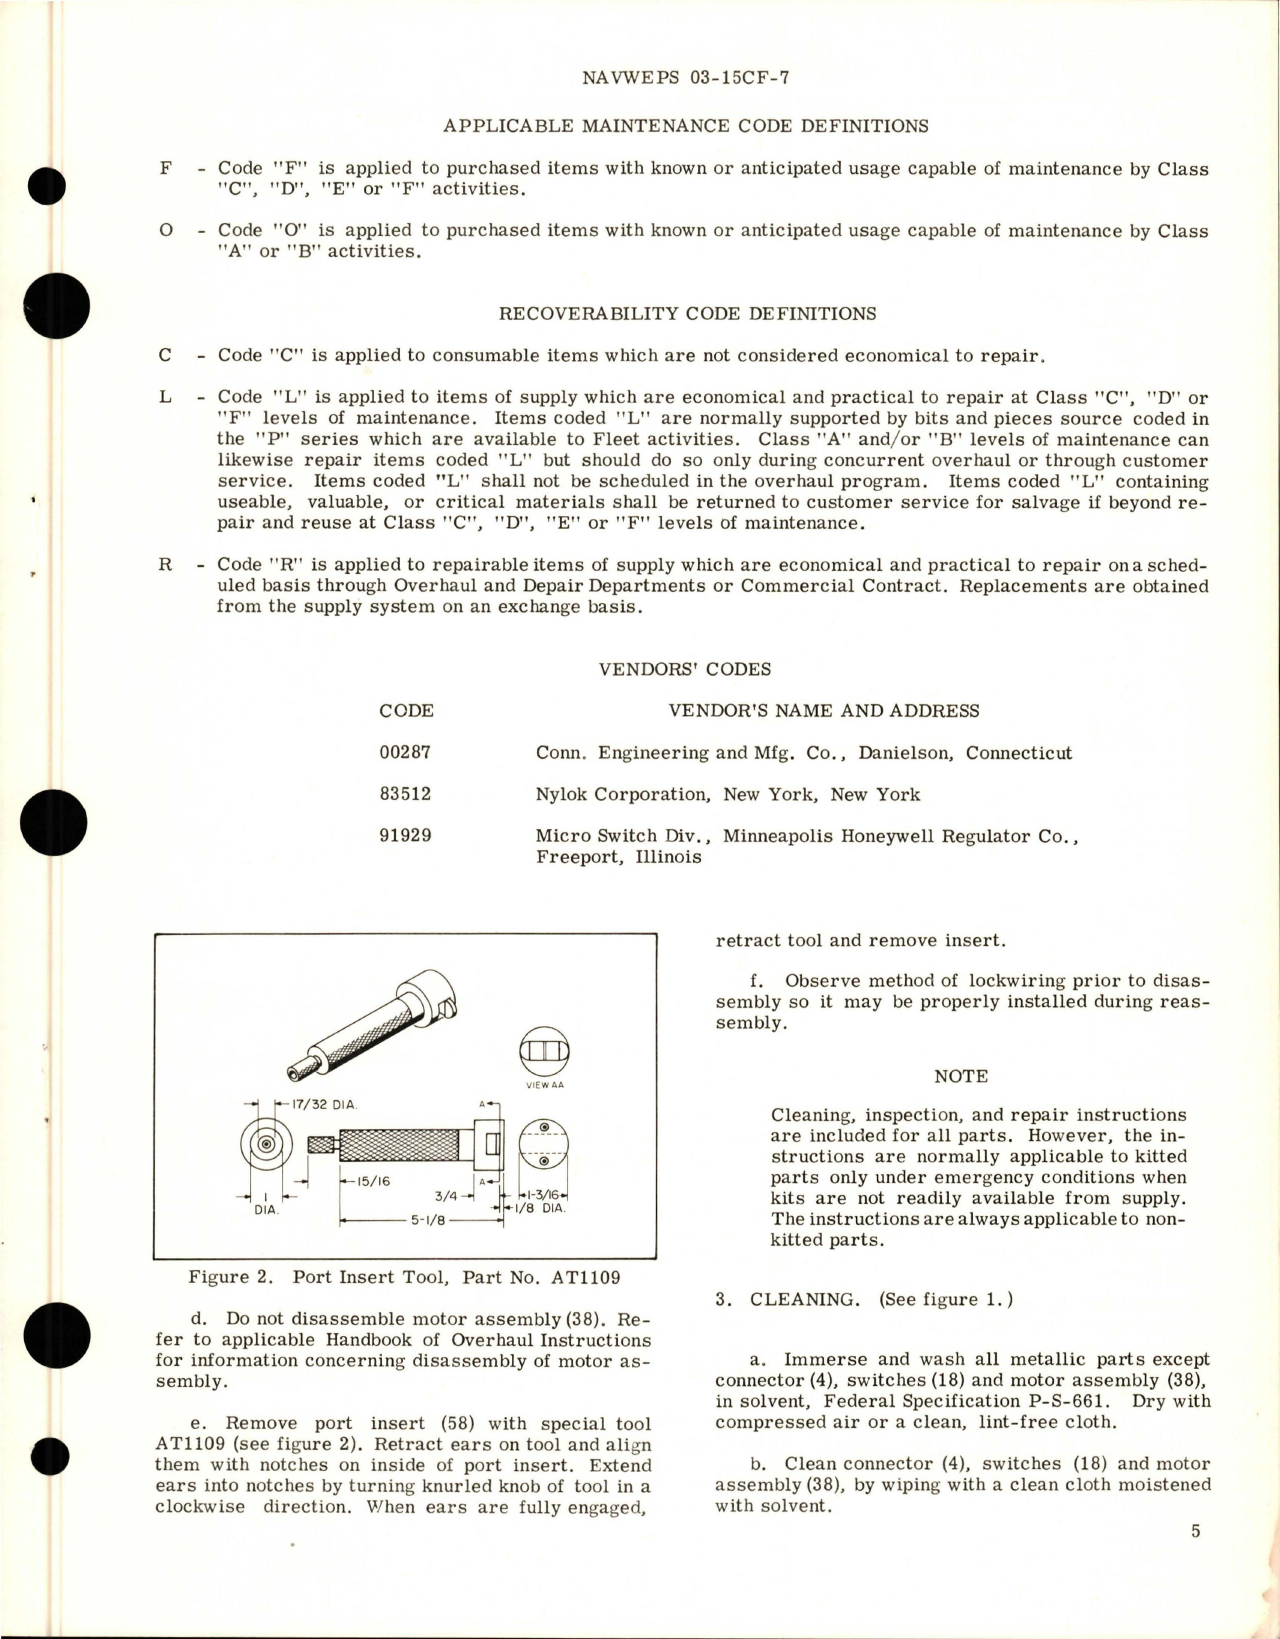 Sample page 5 from AirCorps Library document: Overhaul Instructions with Parts Breakdown for Motor Actuated Gate Shutoff Valve - Part 132555-1